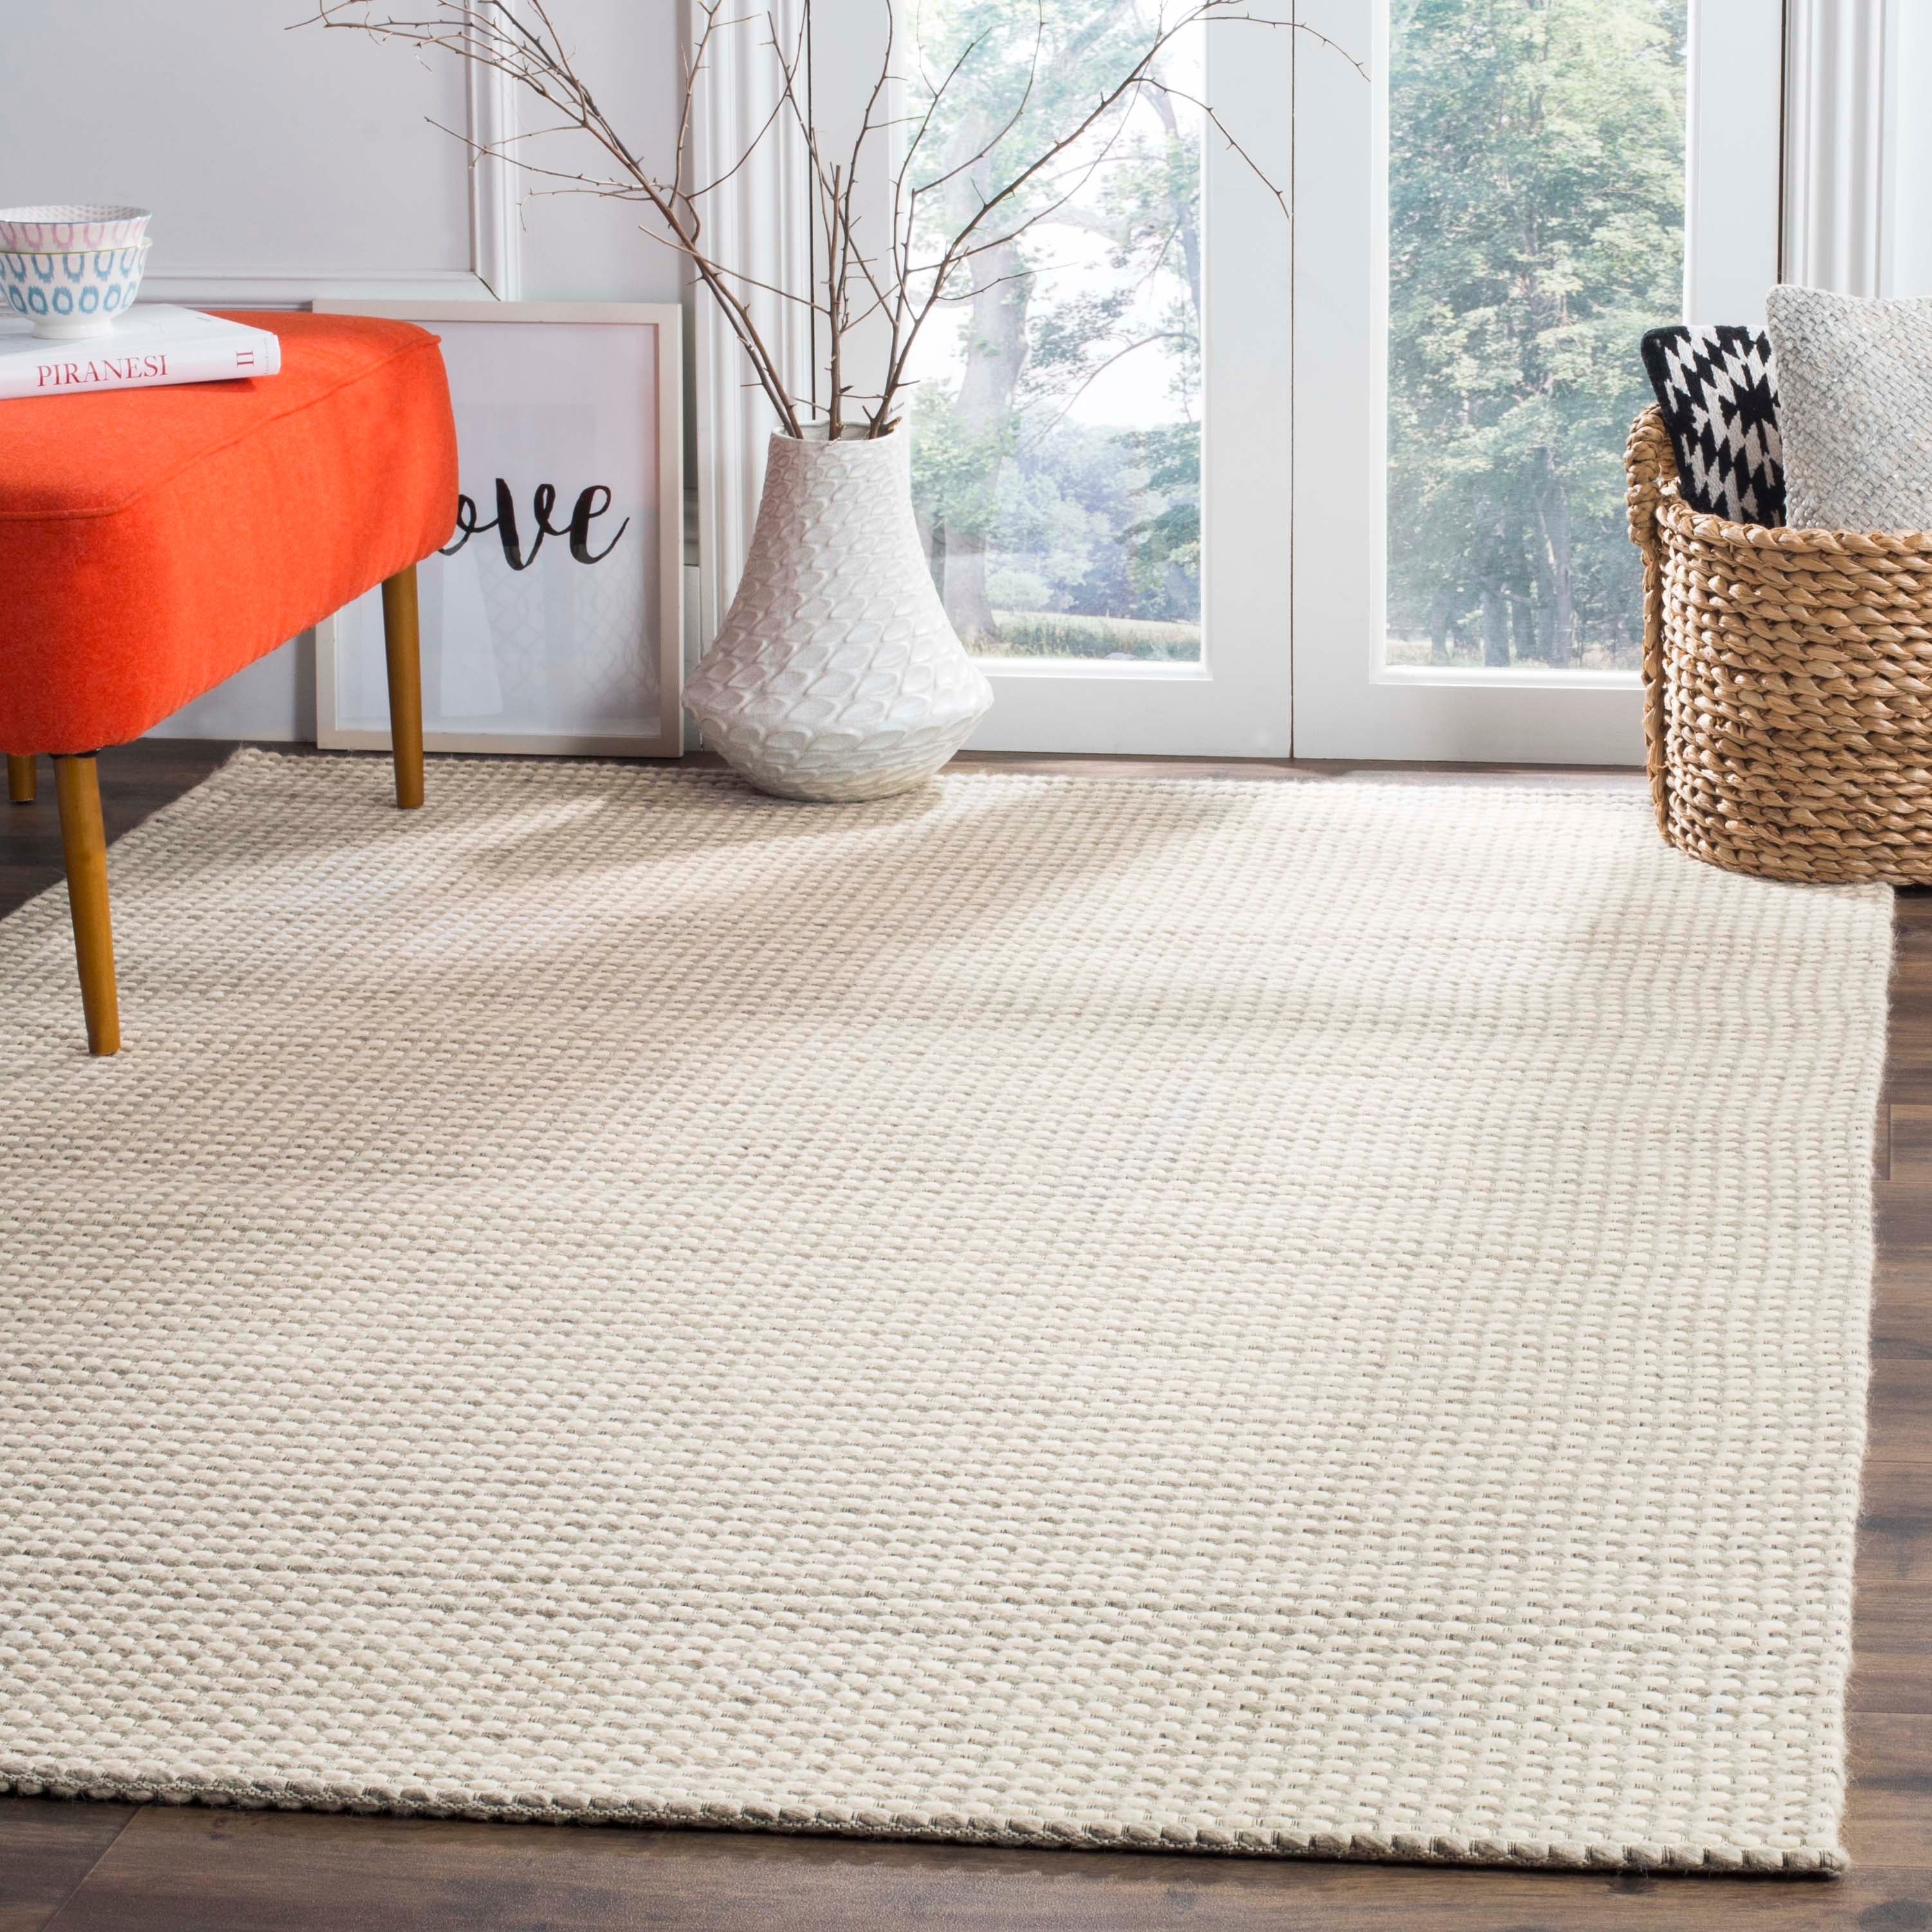 Small Boho Kitchen Rug, Hand-Woven Accent Cotton Neutral Tufted Textured  Carpet with Tassel for Bedroom Bathroom, Modern Farmhouse Decorative  Washable